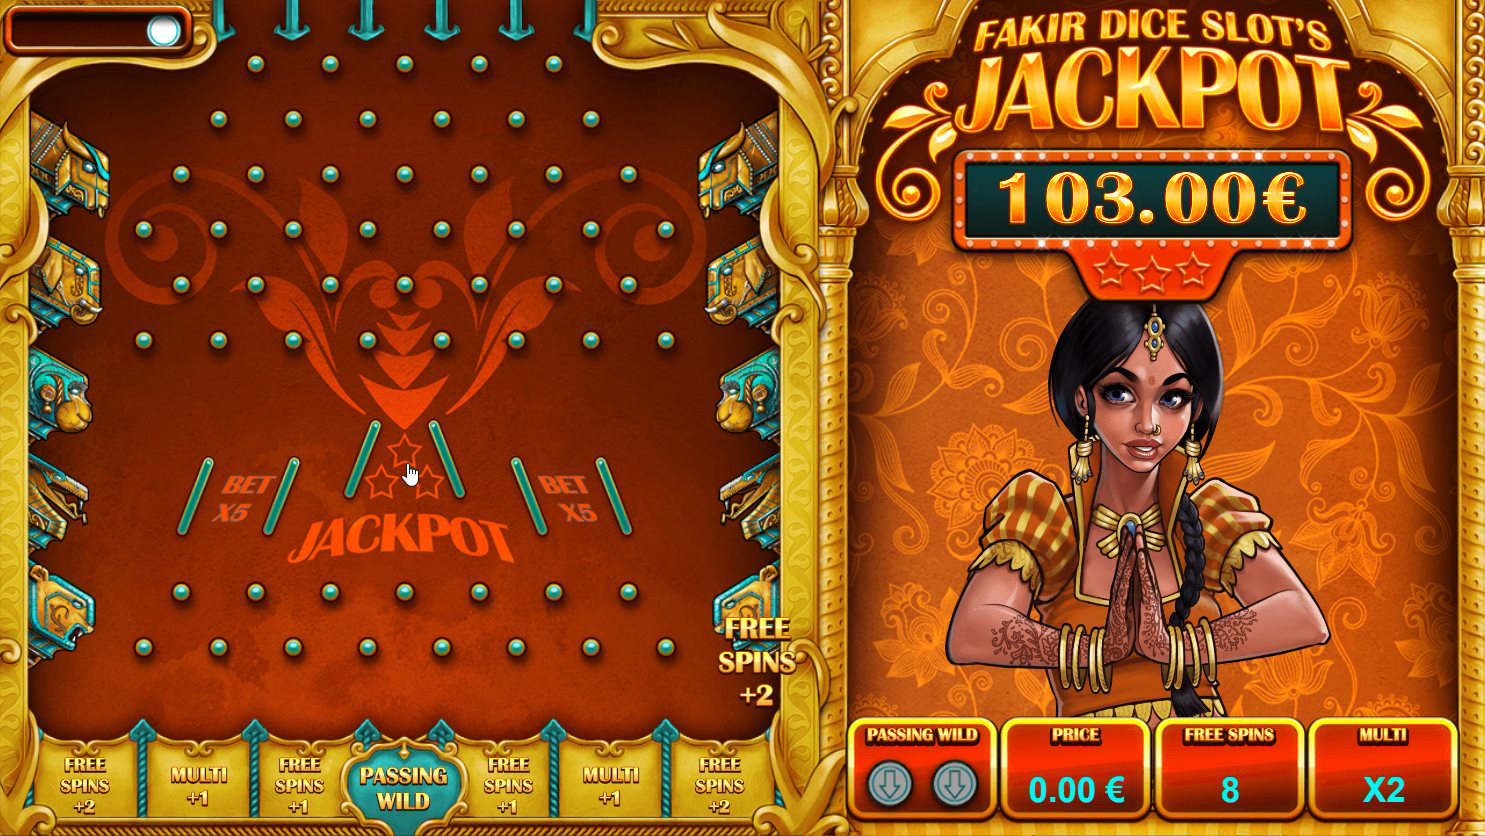 Free Spins on the betFIRST Casino dice slot game called Fakir